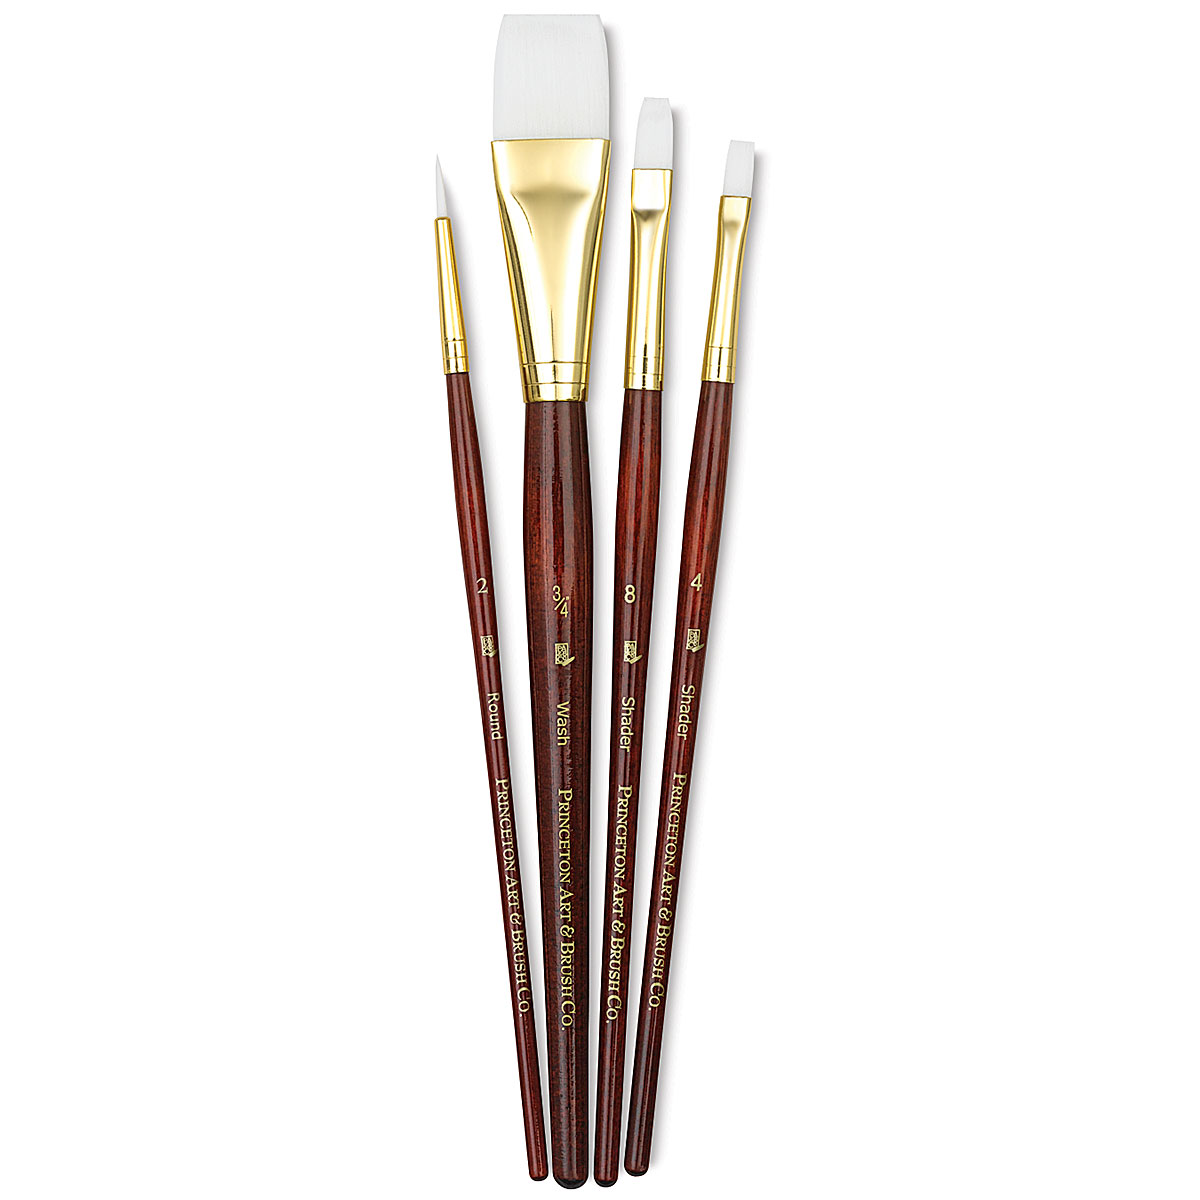 Princeton Real Value, Series 9100, Paint Brush Sets for Acrylic, Oil &  Watercolor Painting, Syn-White Taklon (Rnd 2, 6, Fan 2, Flb 4, Angular 4,  Flat 10)